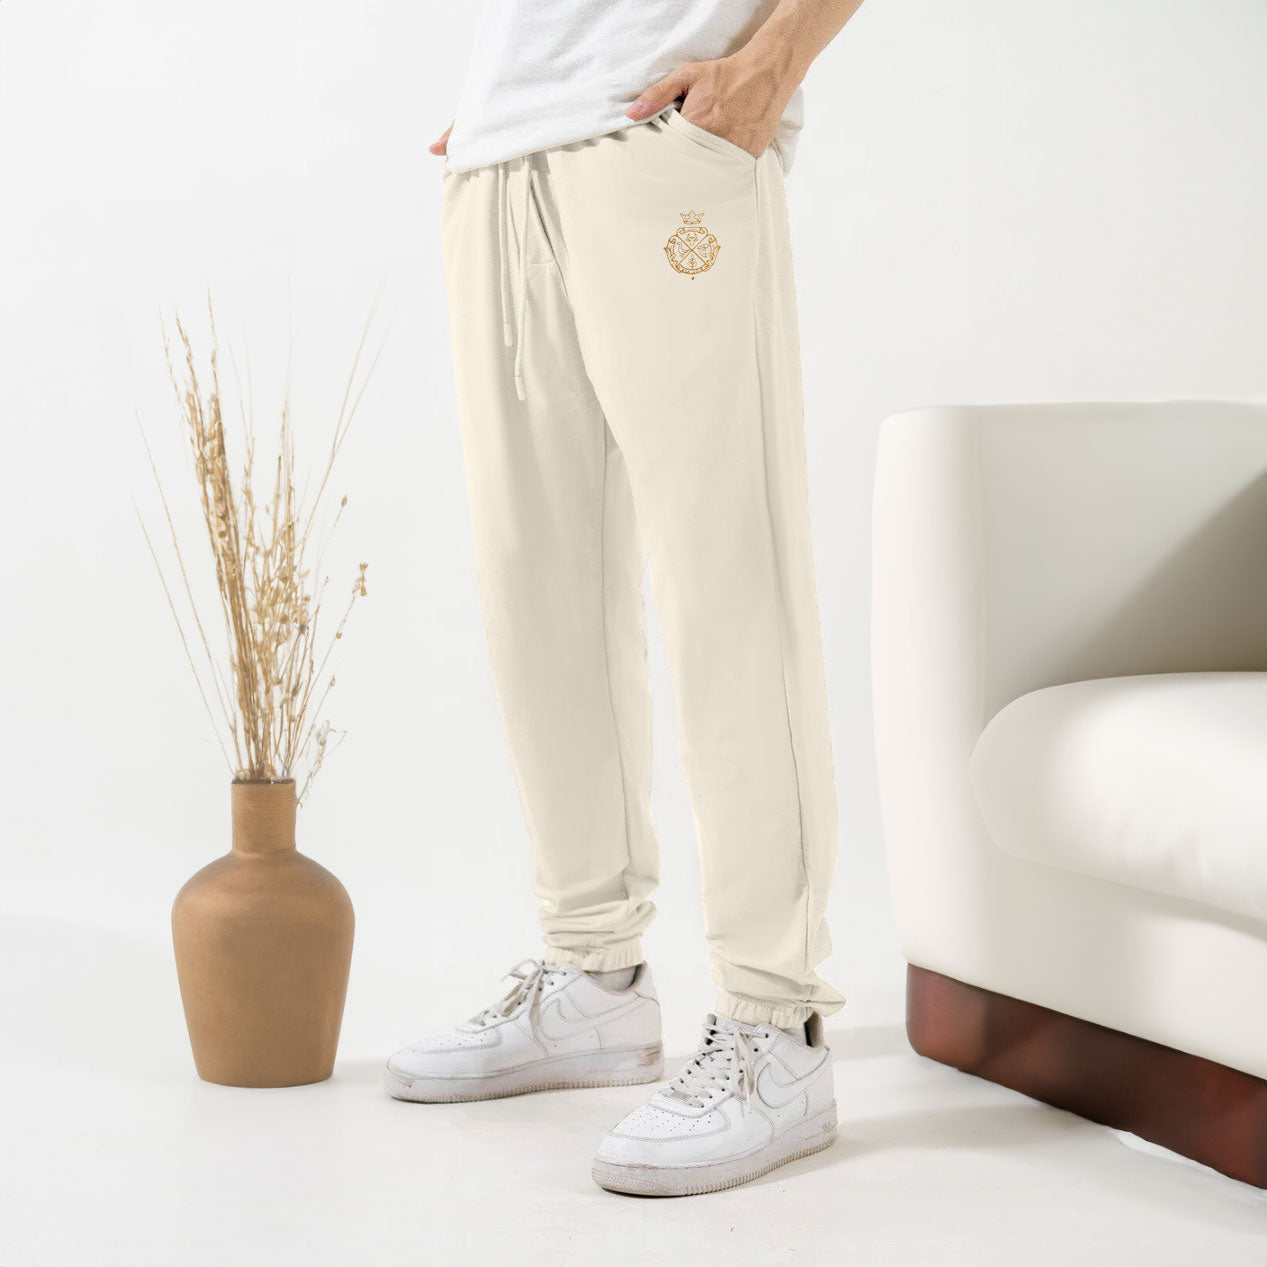 Polo Republica Men's Crest Embroidered Terry Jogger Pants